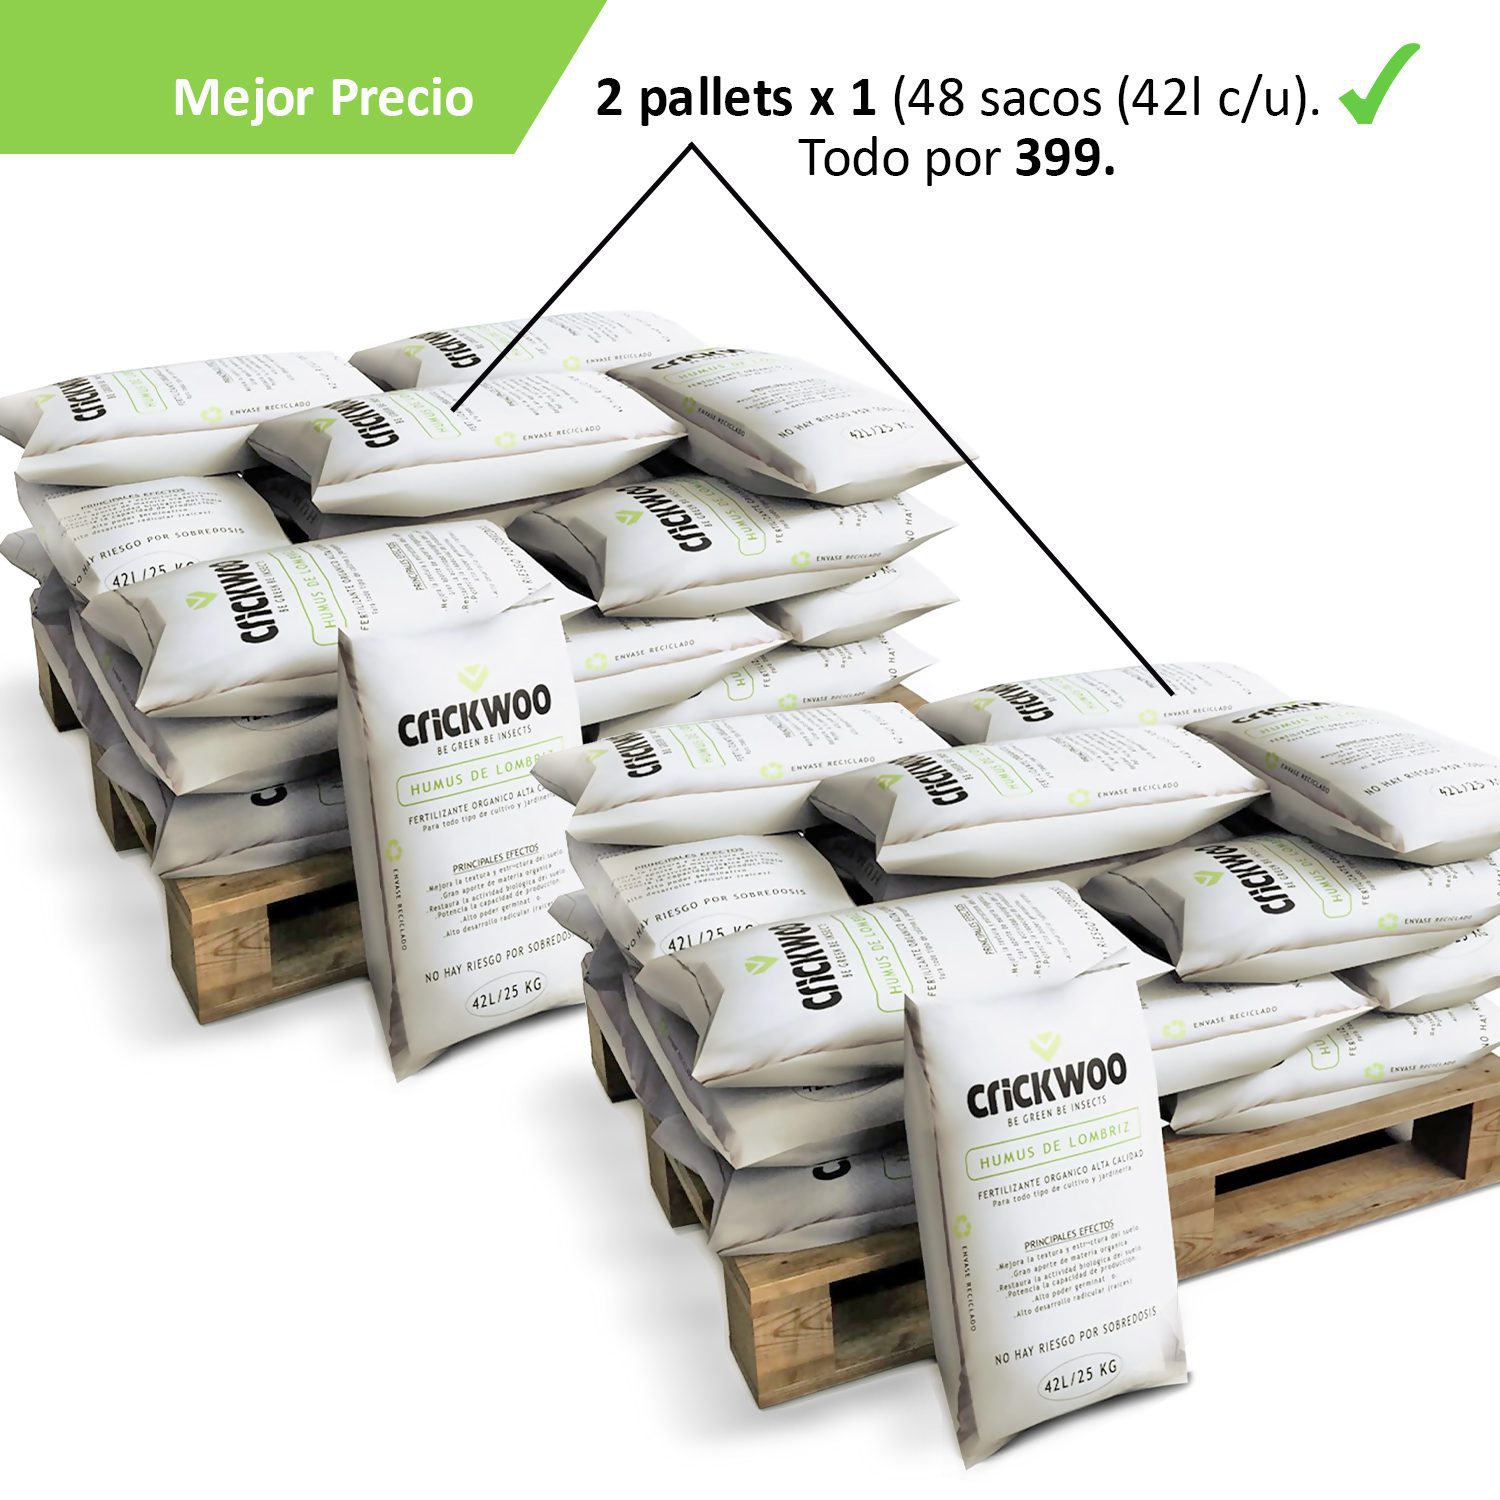 004 2 pallets 24 bags-42 liters with price